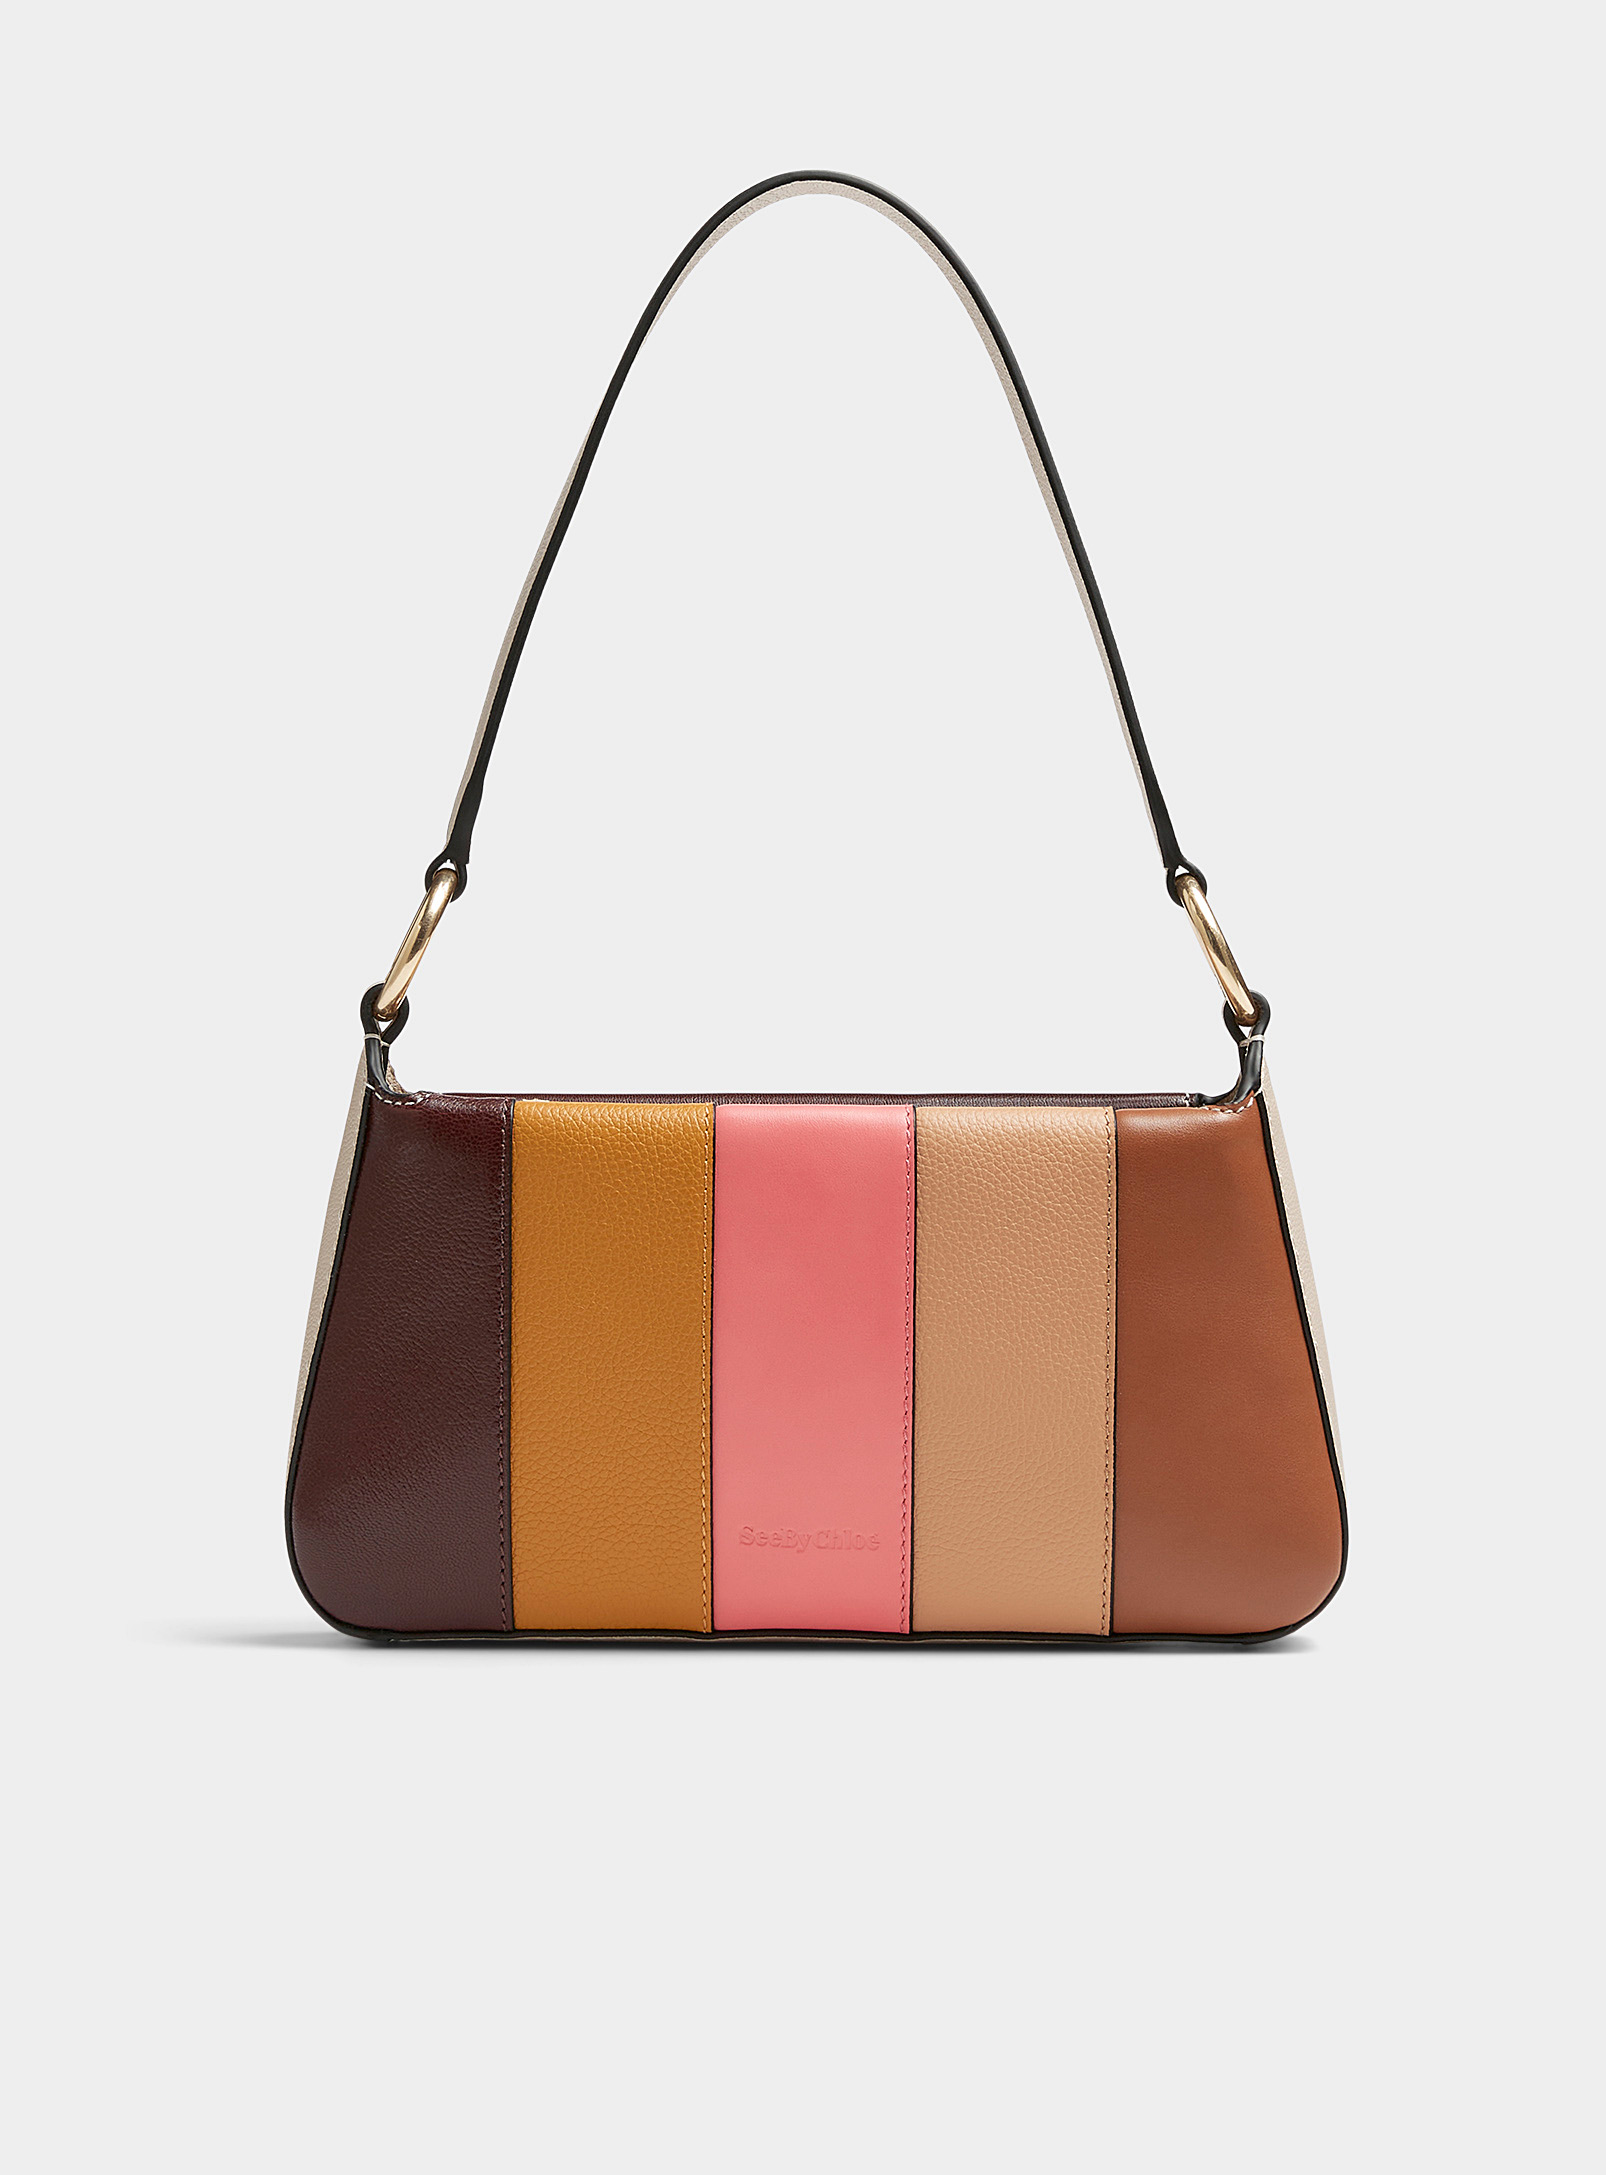 SEE BY CHLOÉ TILDA COLOURFUL LEATHER BAGUETTE BAG